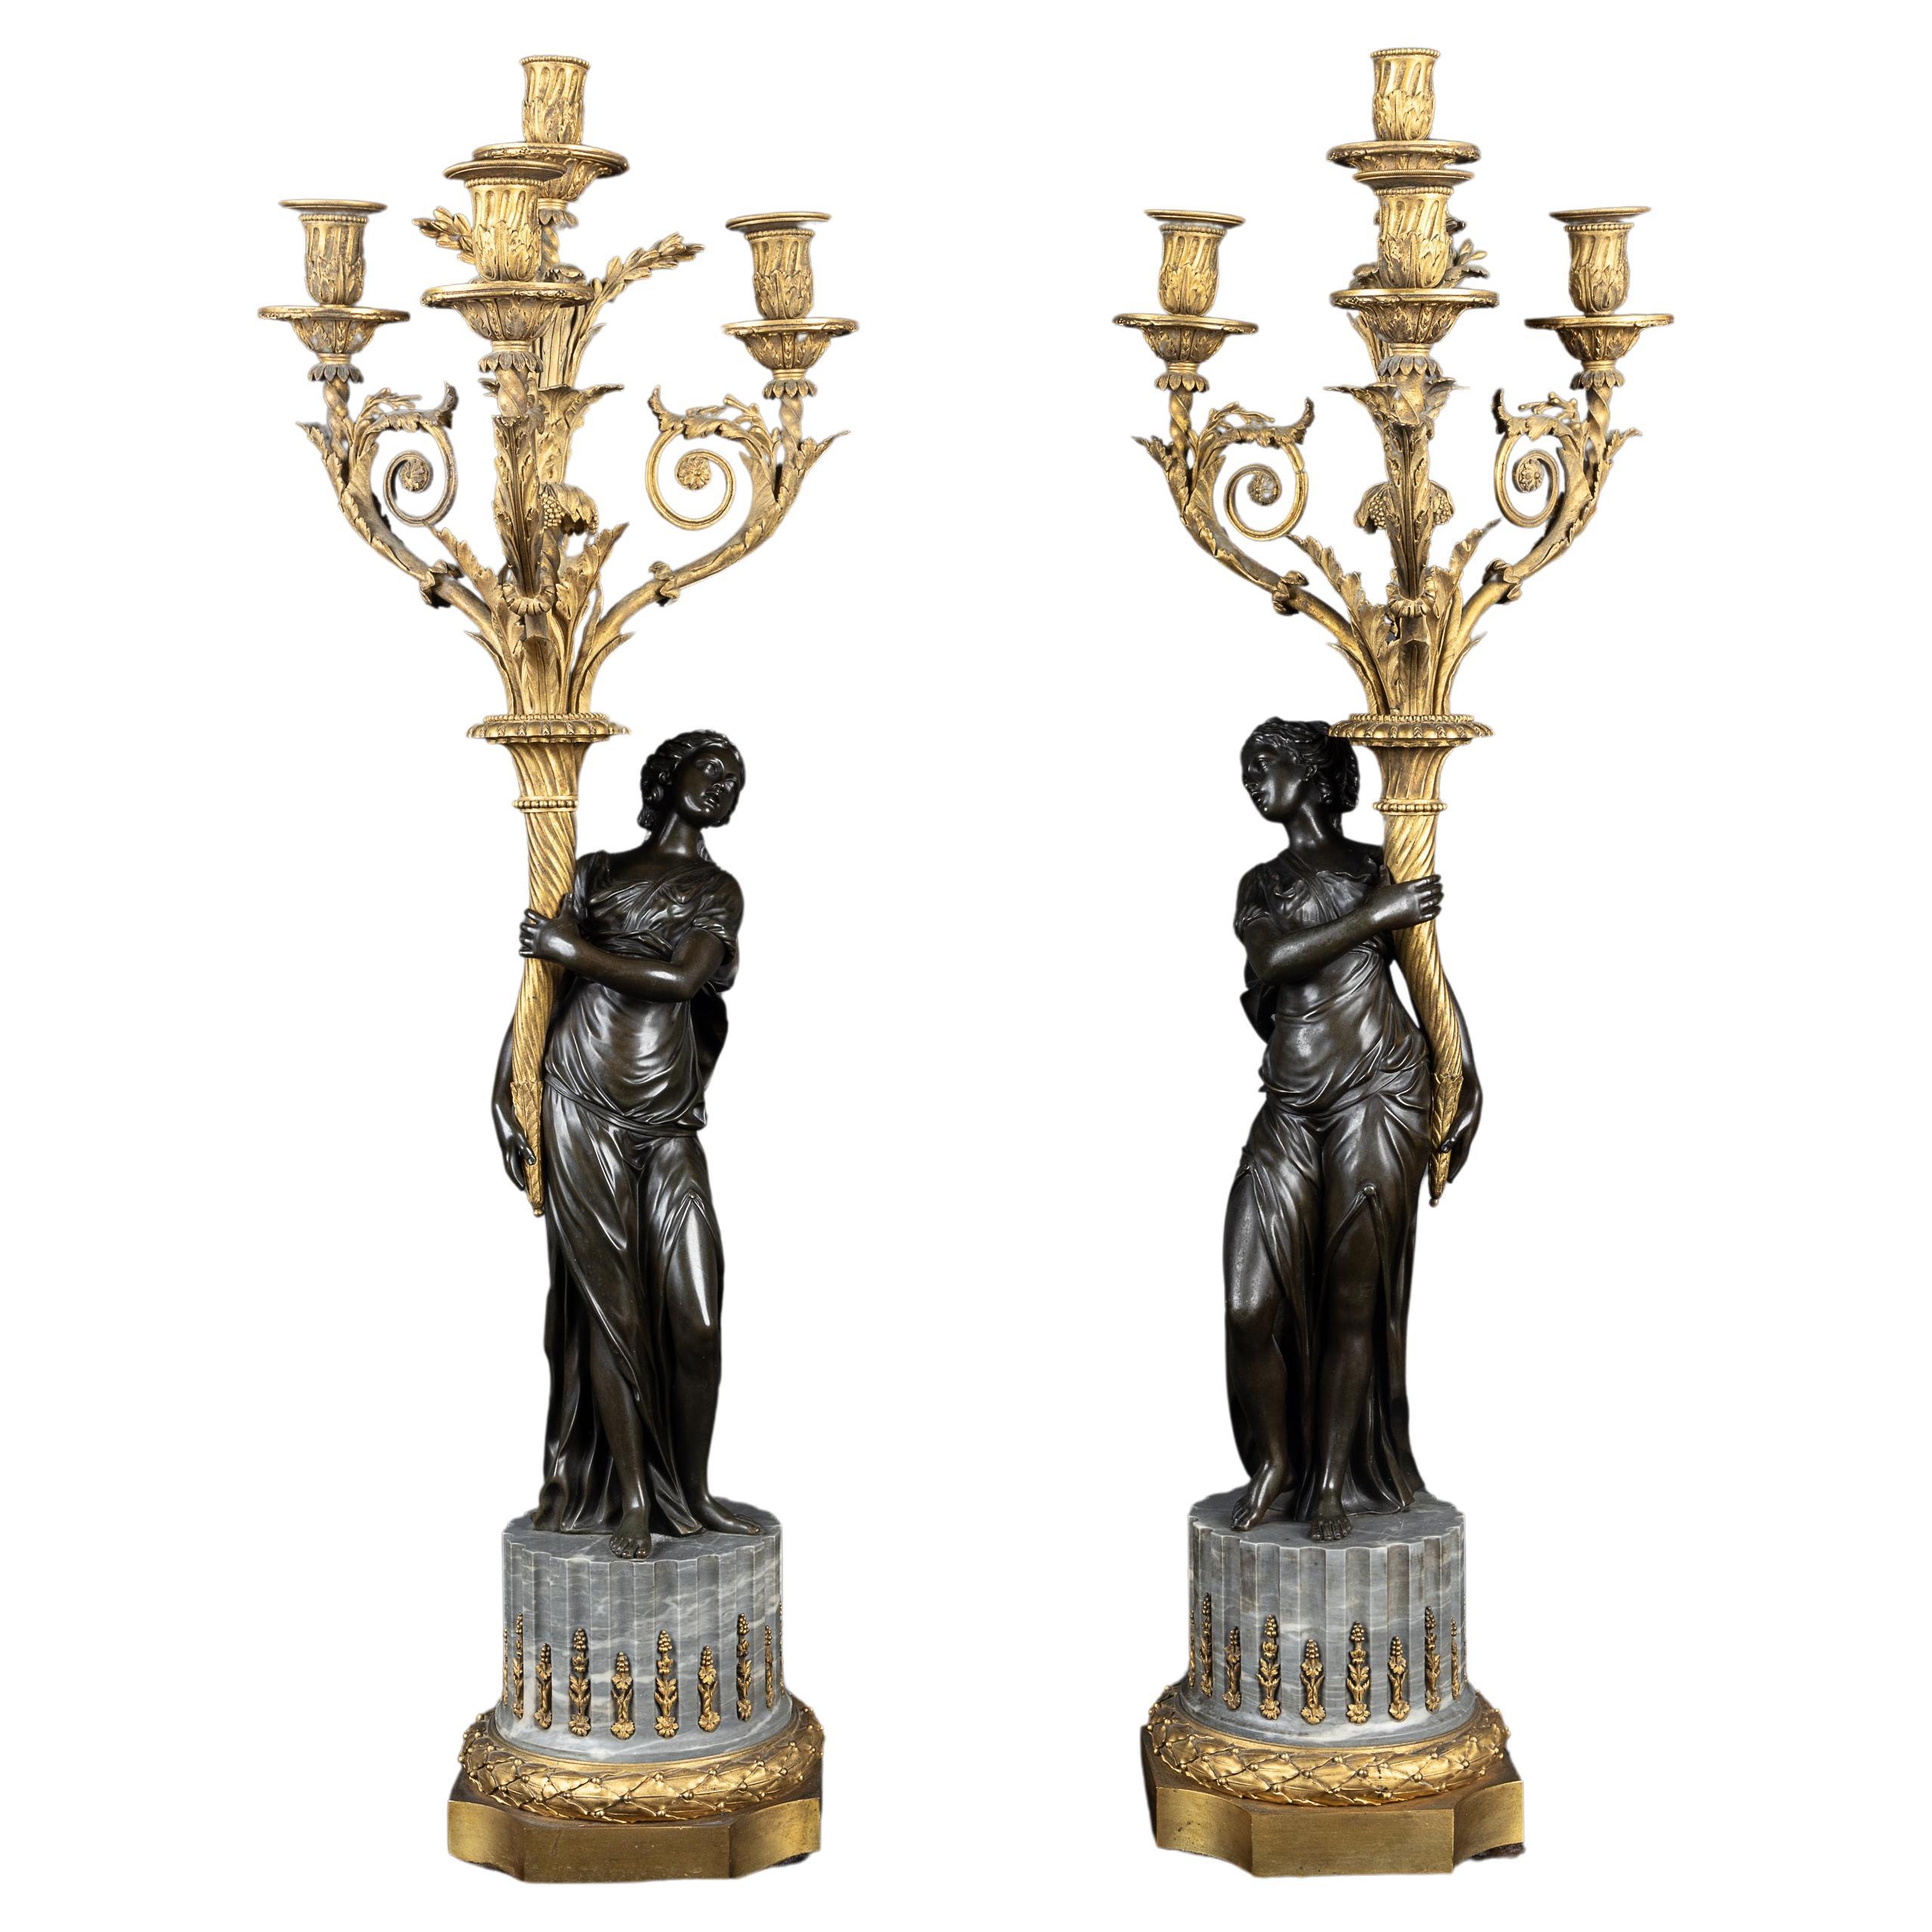 Stunning Pair of French 19th Century Bronze D'oré Candelabra with Female Figures